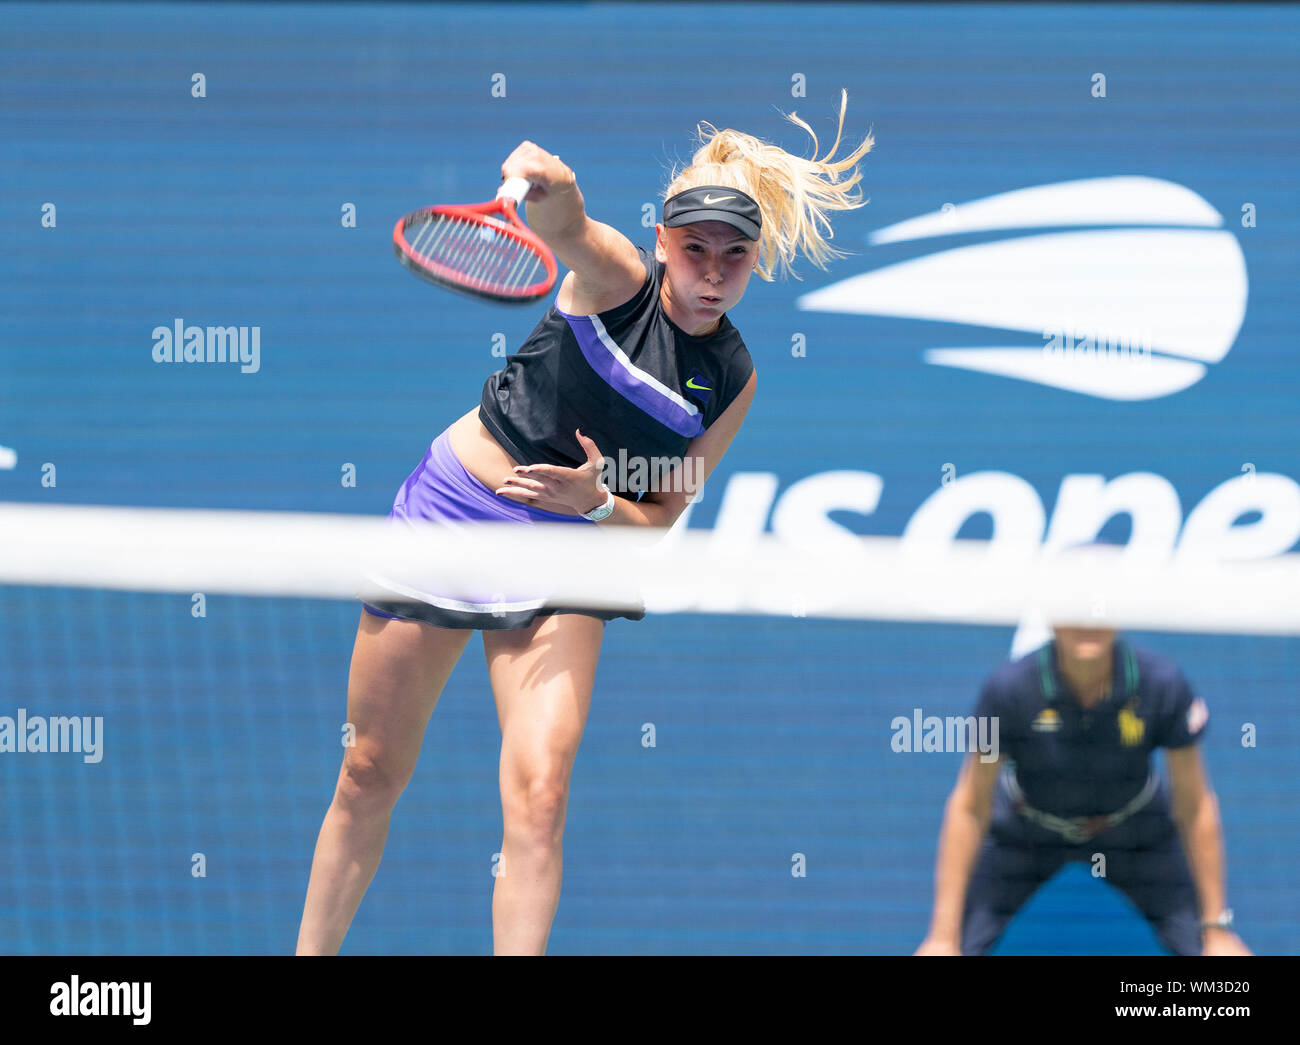 New York, United States. 04th Sep, 2019. Belinda Bencic (Switzerland) in  action during quarter final of US Open Championships against Donna Vekic  (Croatia) at Billie Jean King National Tennis Center (Photo by